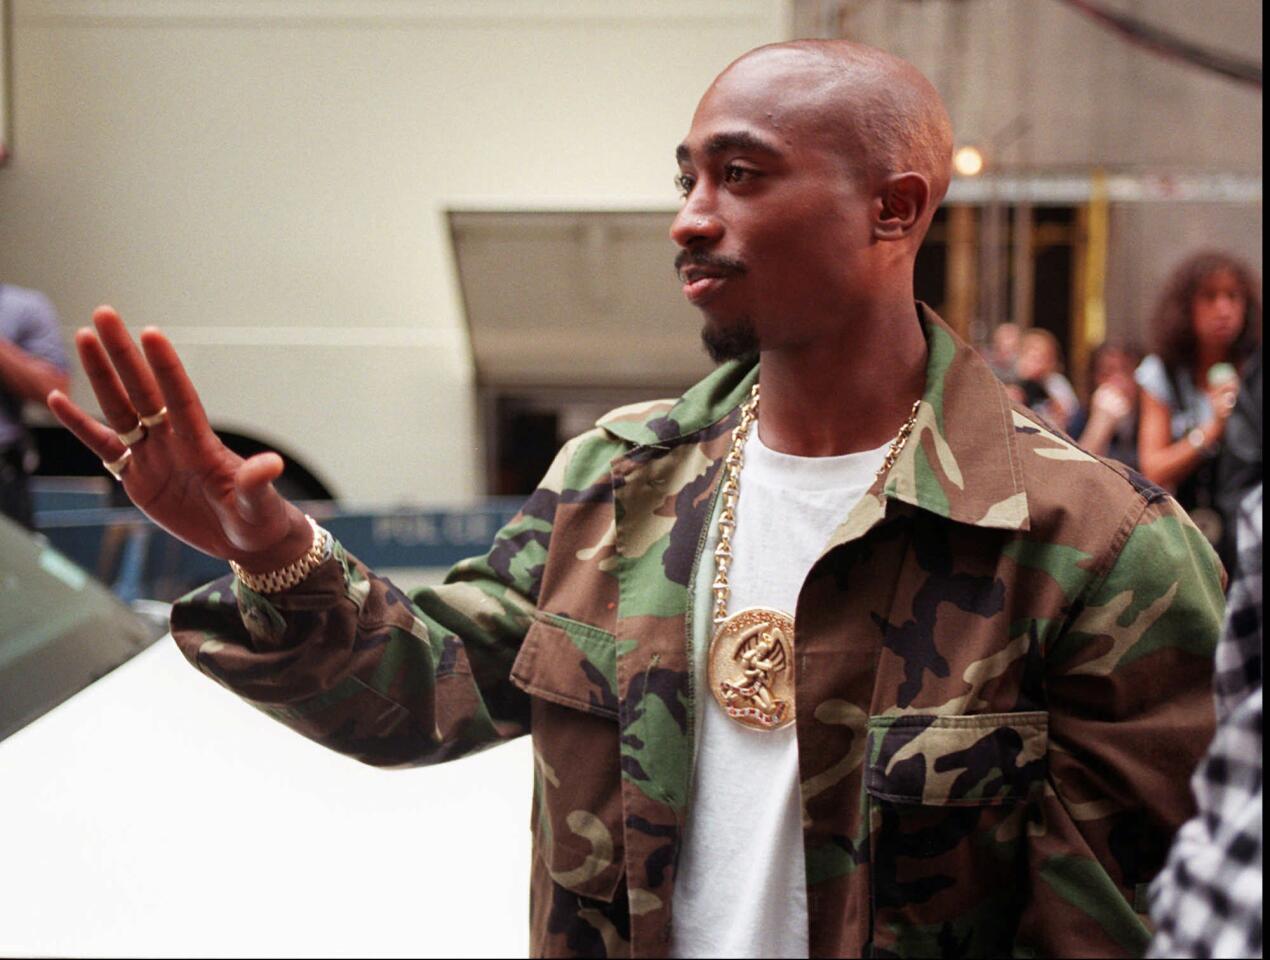 Images of Tupac